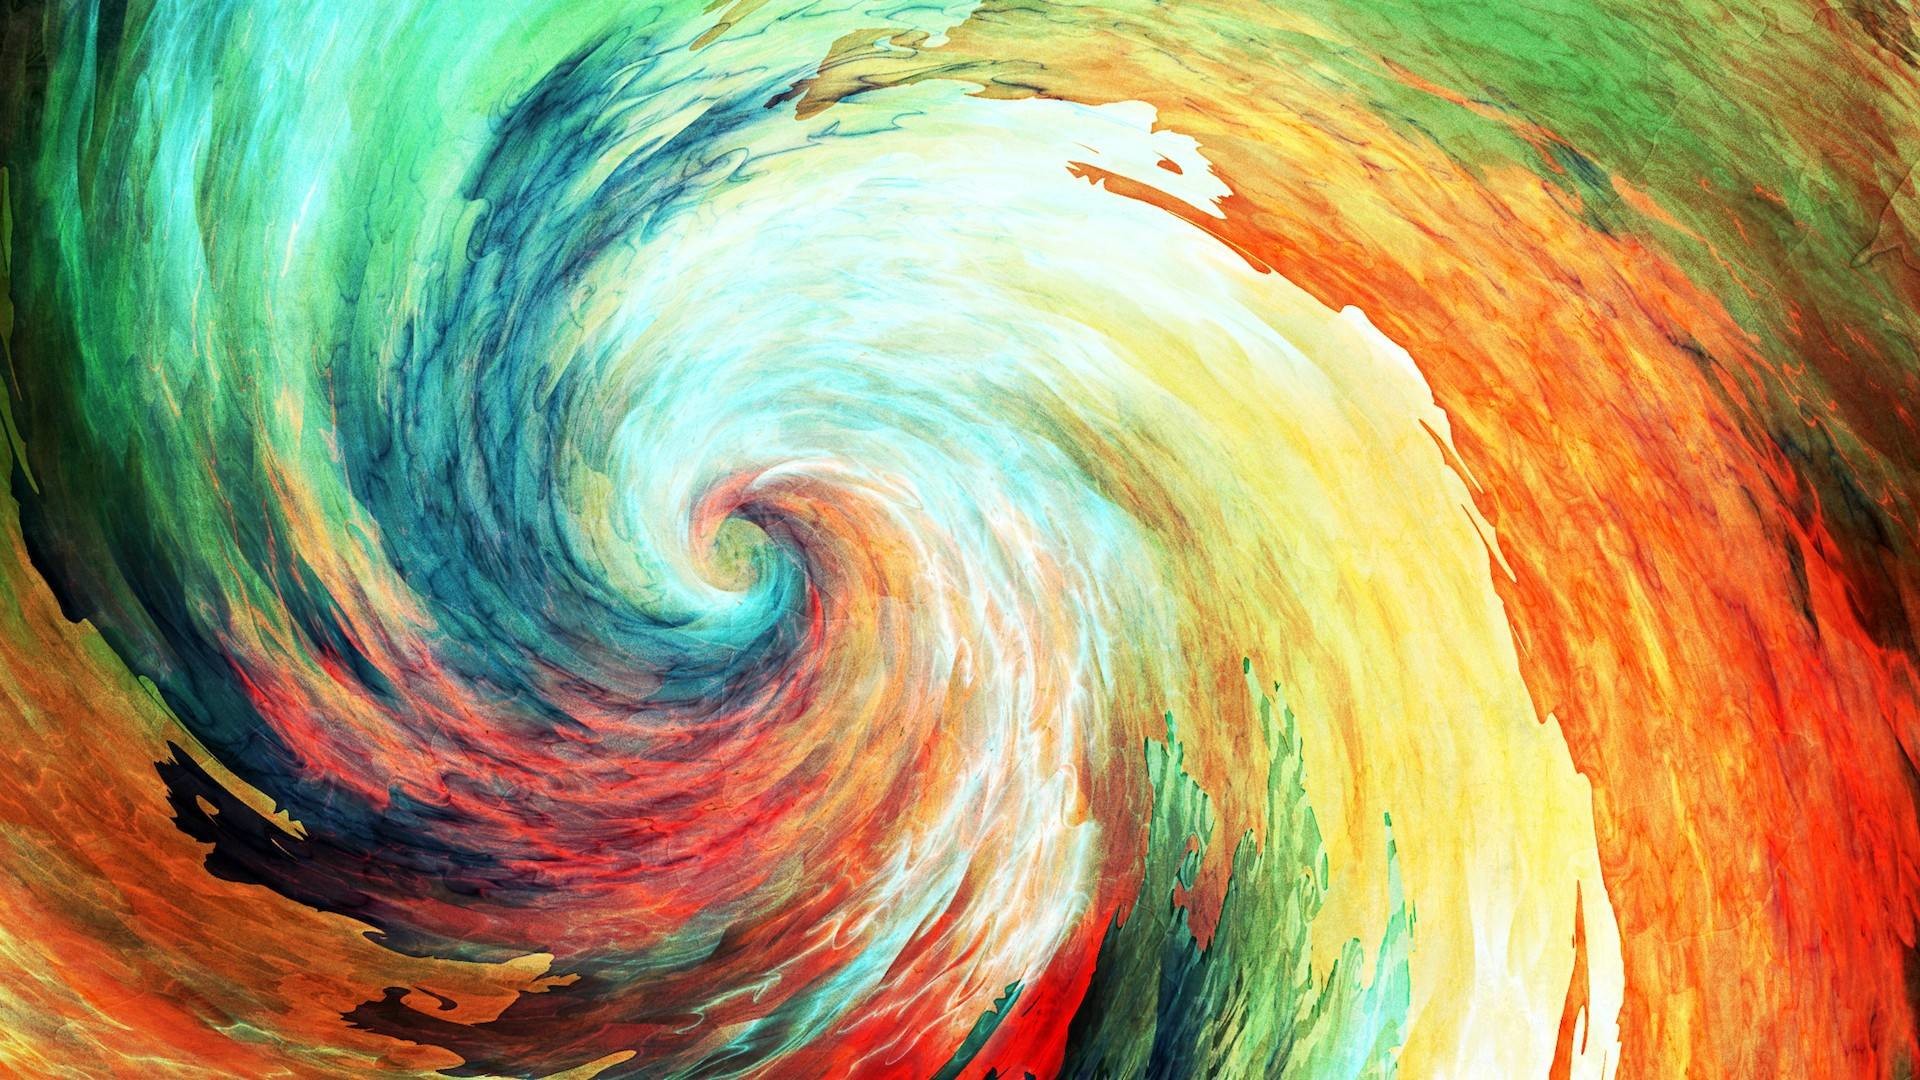 1920x1080 Abstract art spiral 1080p | Animated Desktop WallpapersPicture for .